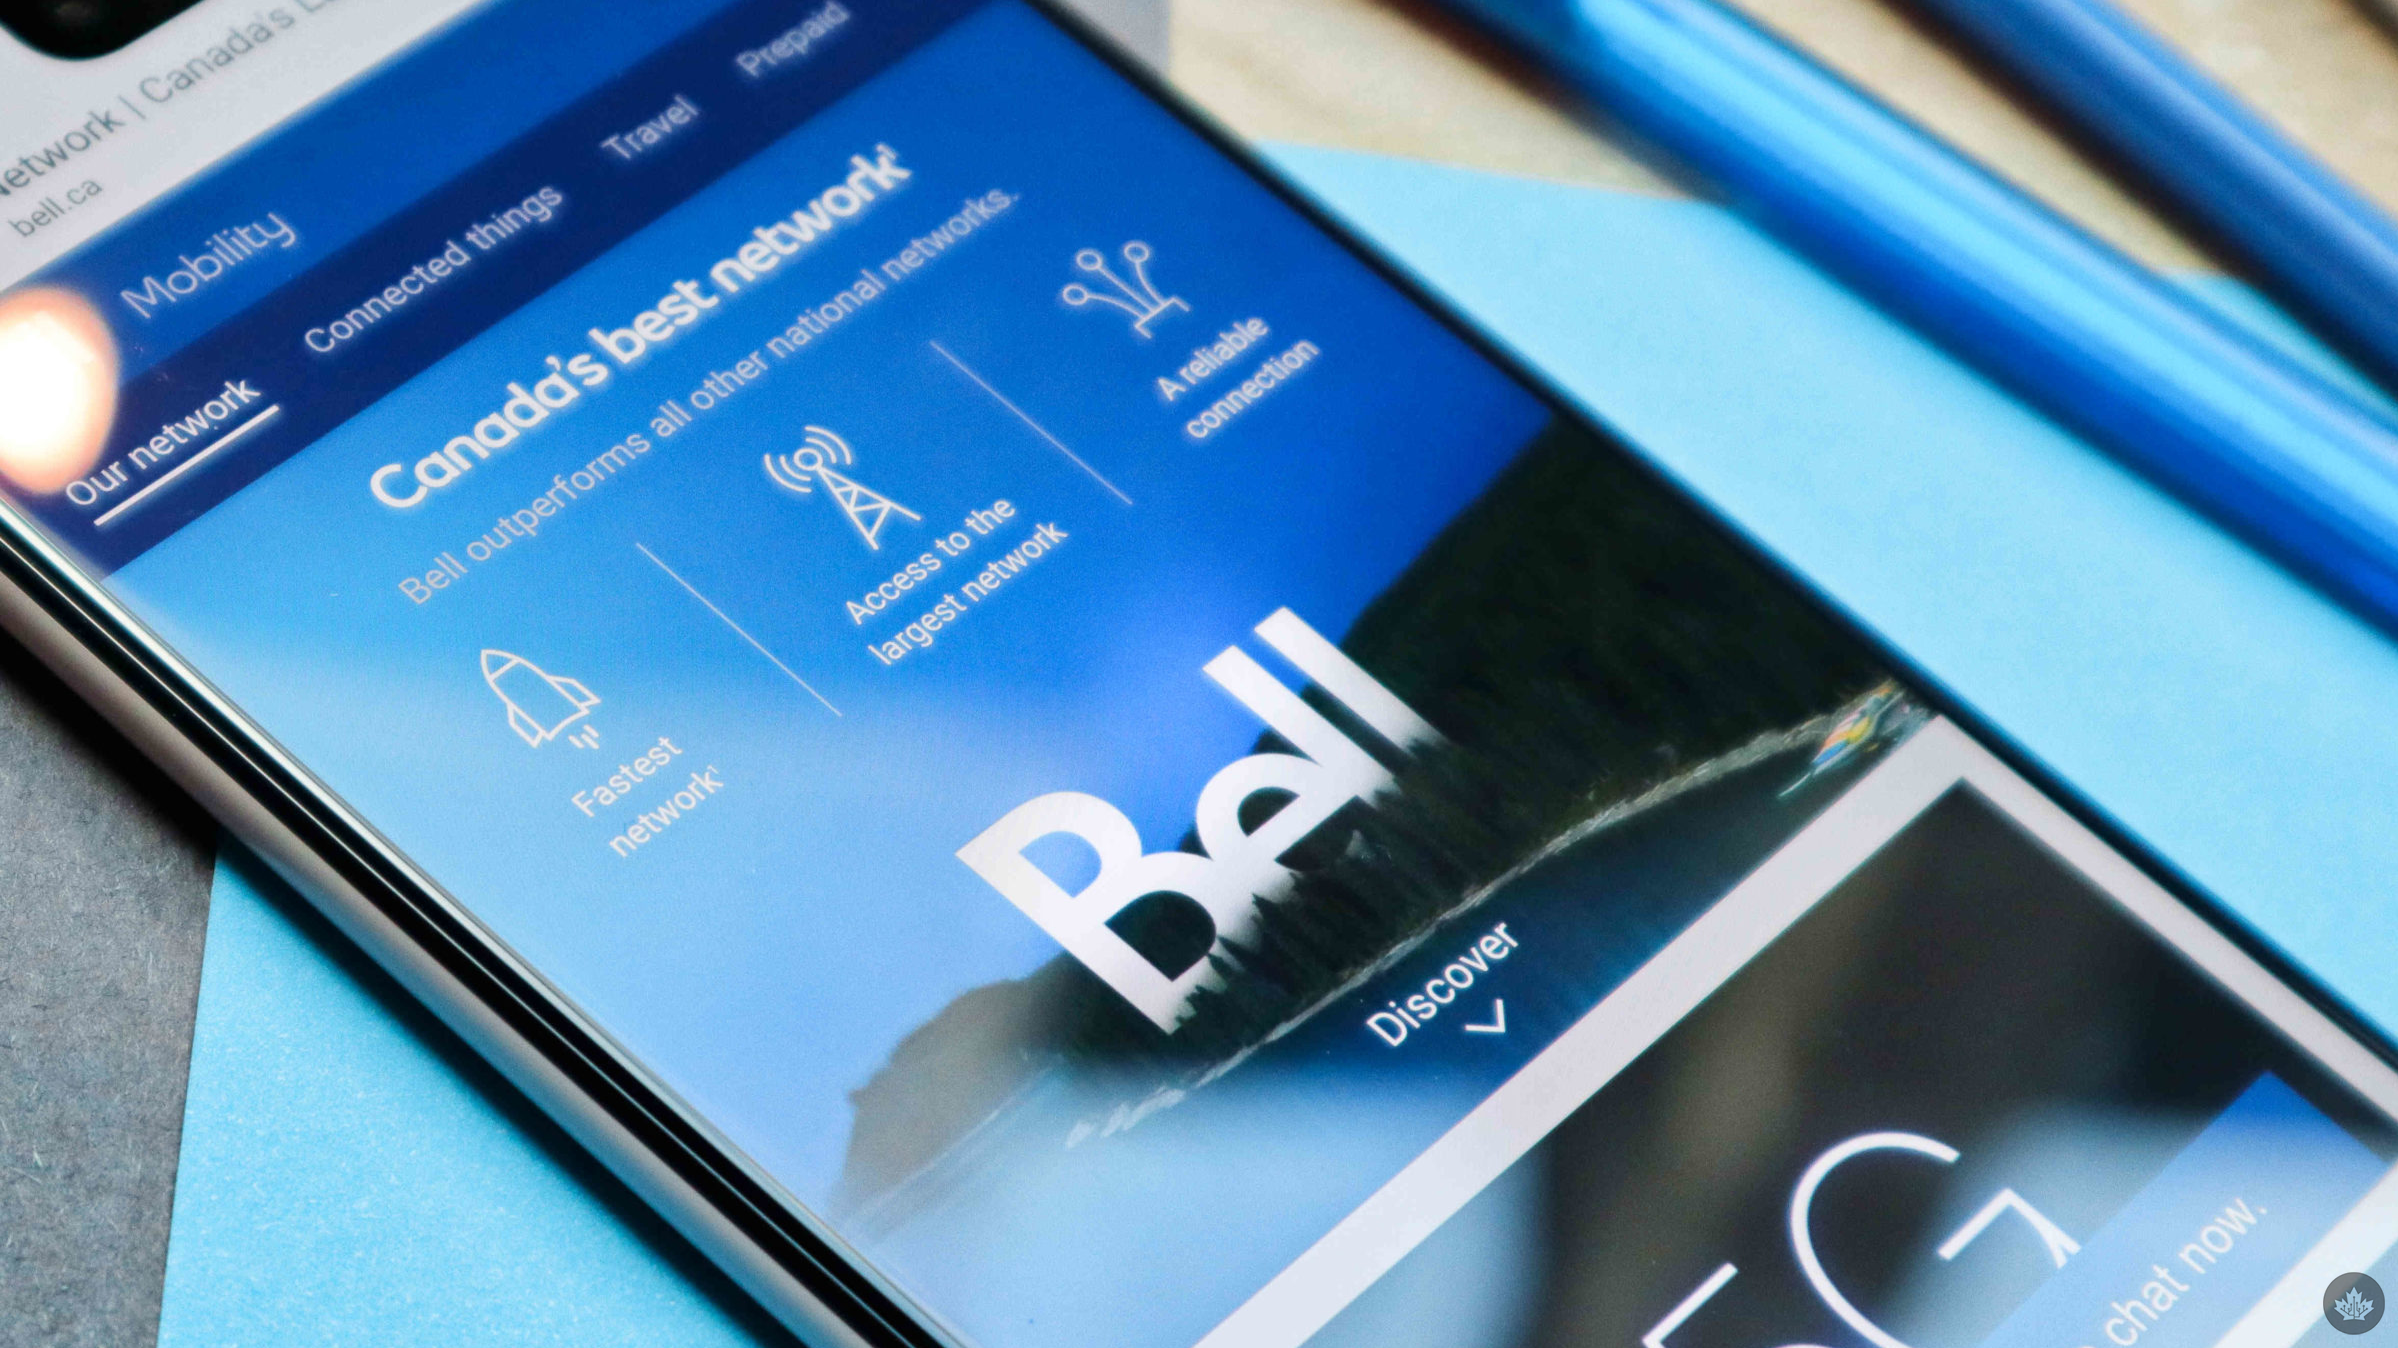 Bell partners with Ontario government to expand fibre internet footprint